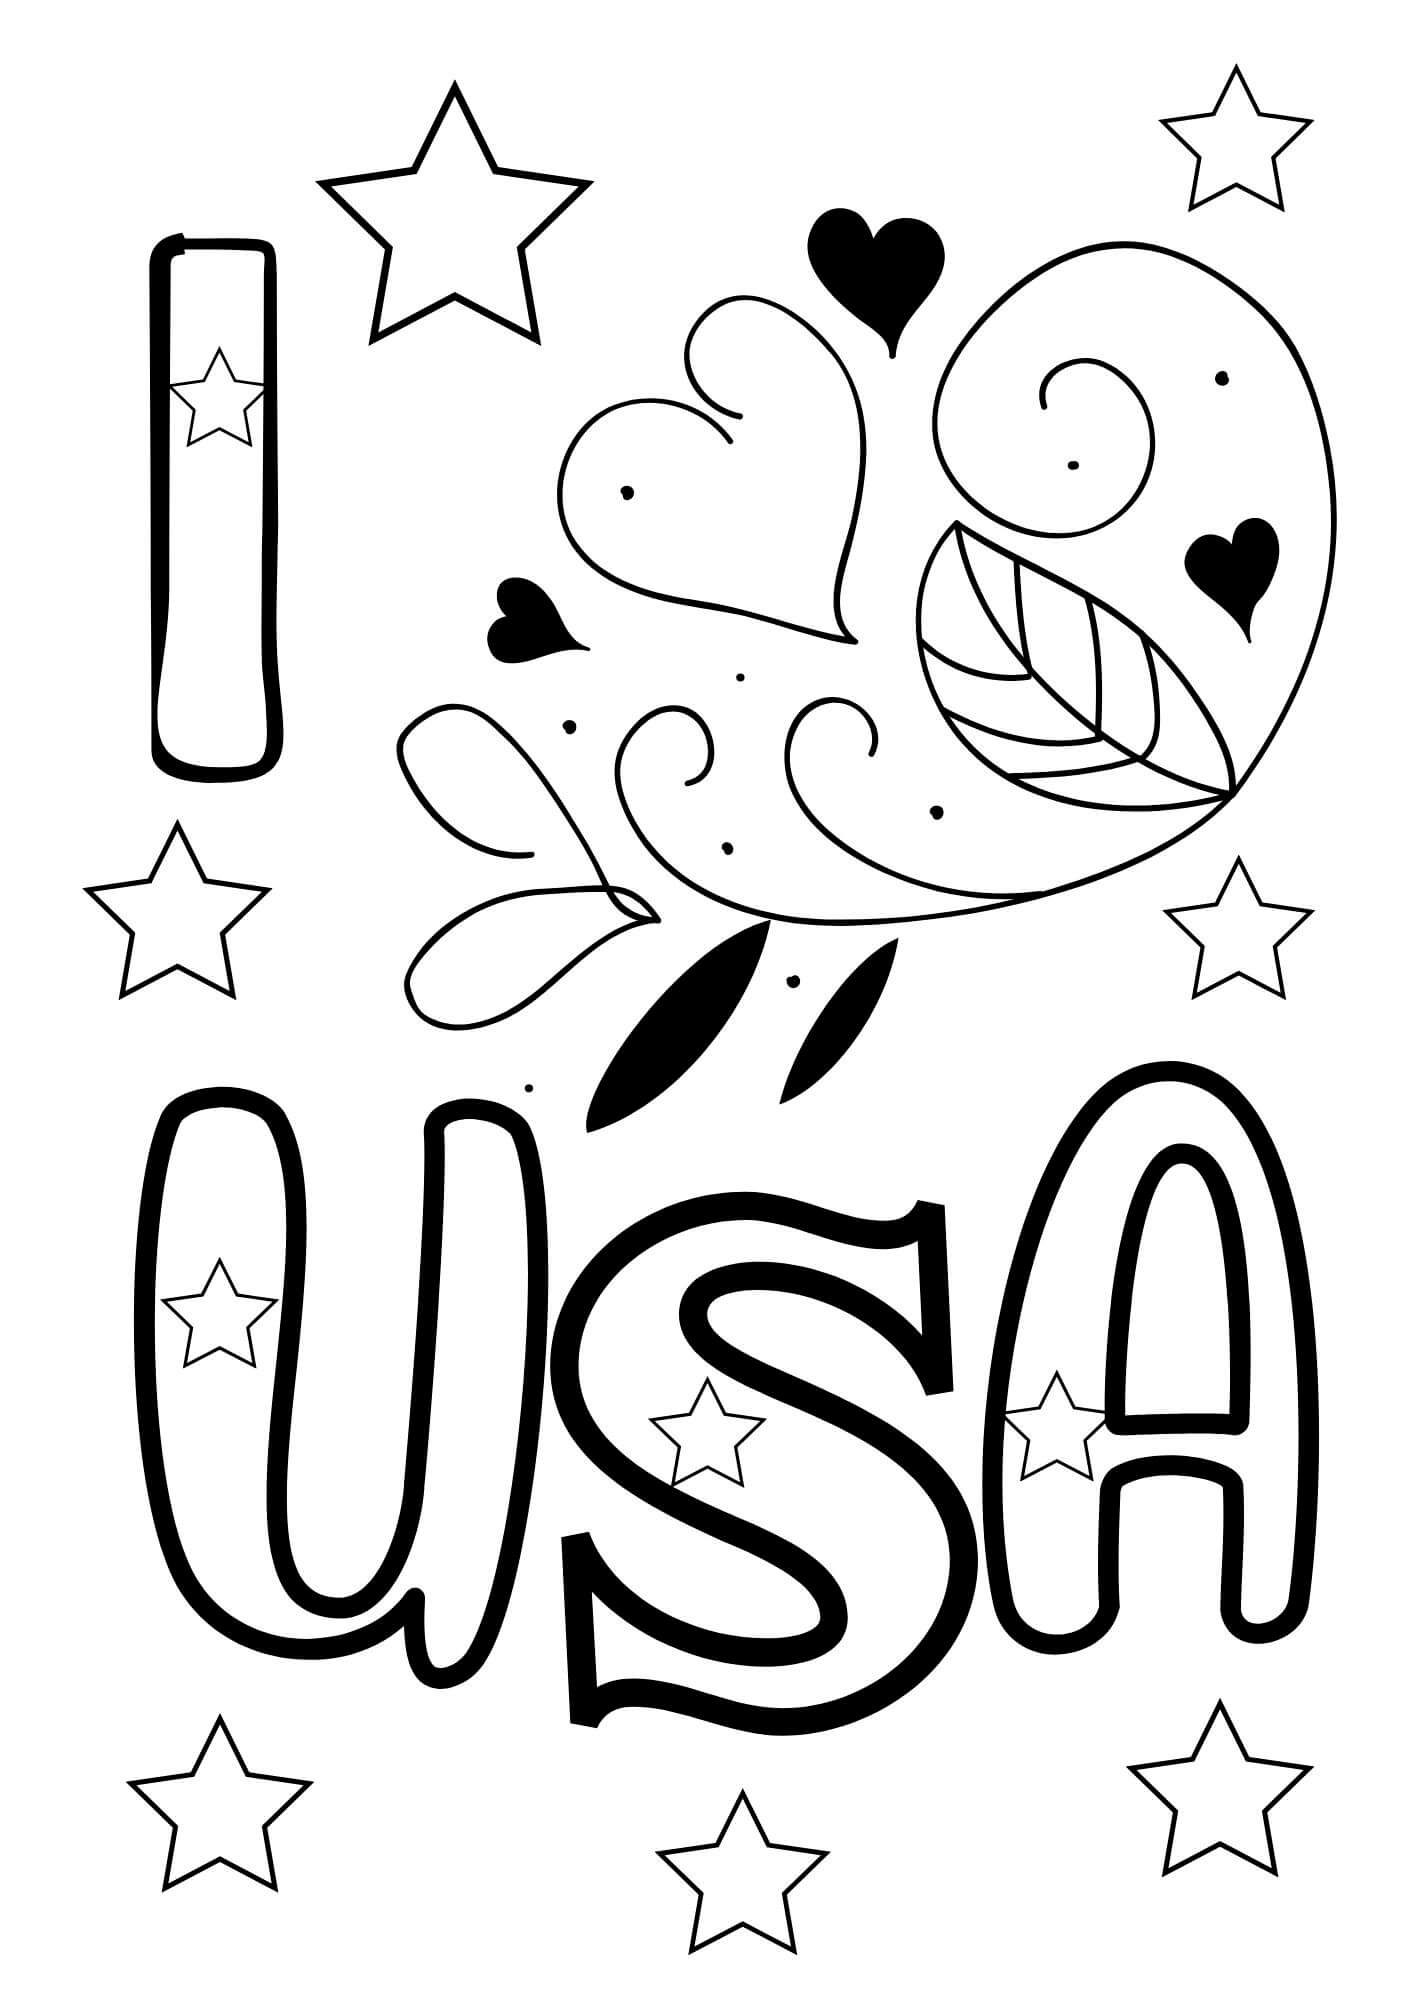 Celebrate Freedom with 4th of July: 180+ Free Coloring Pages 105